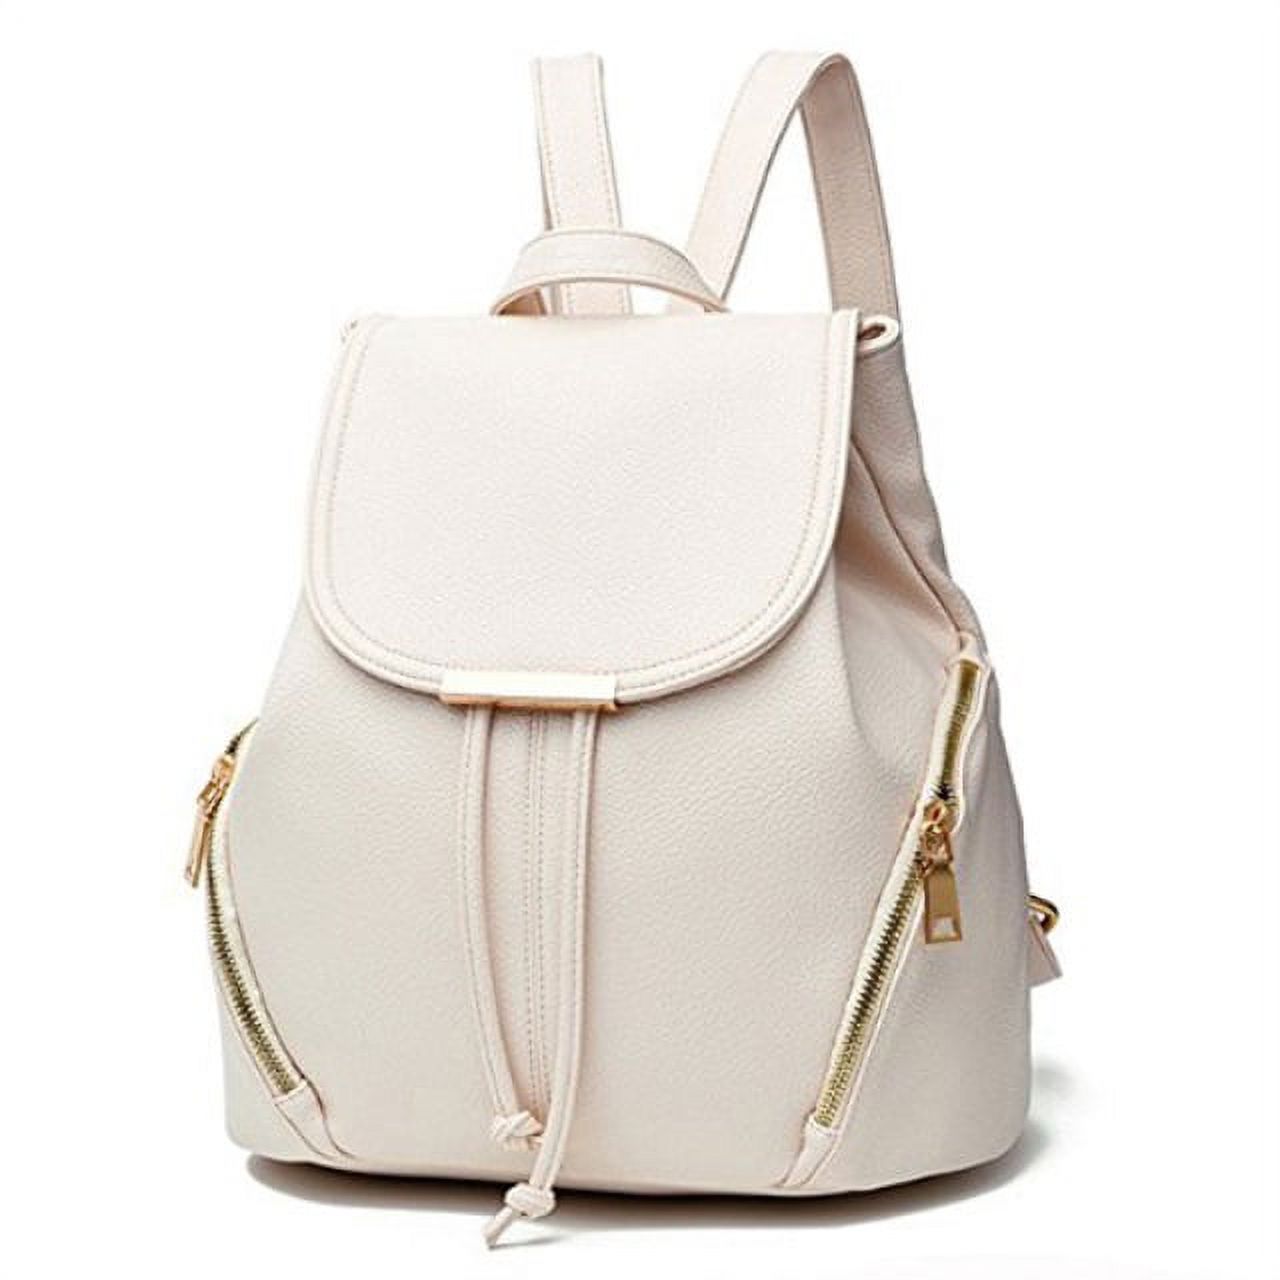 aiseyi Casual Fashion School Leather Backpack Shoulder Bag Mini Backpack for Women Girls Purse White - image 1 of 8